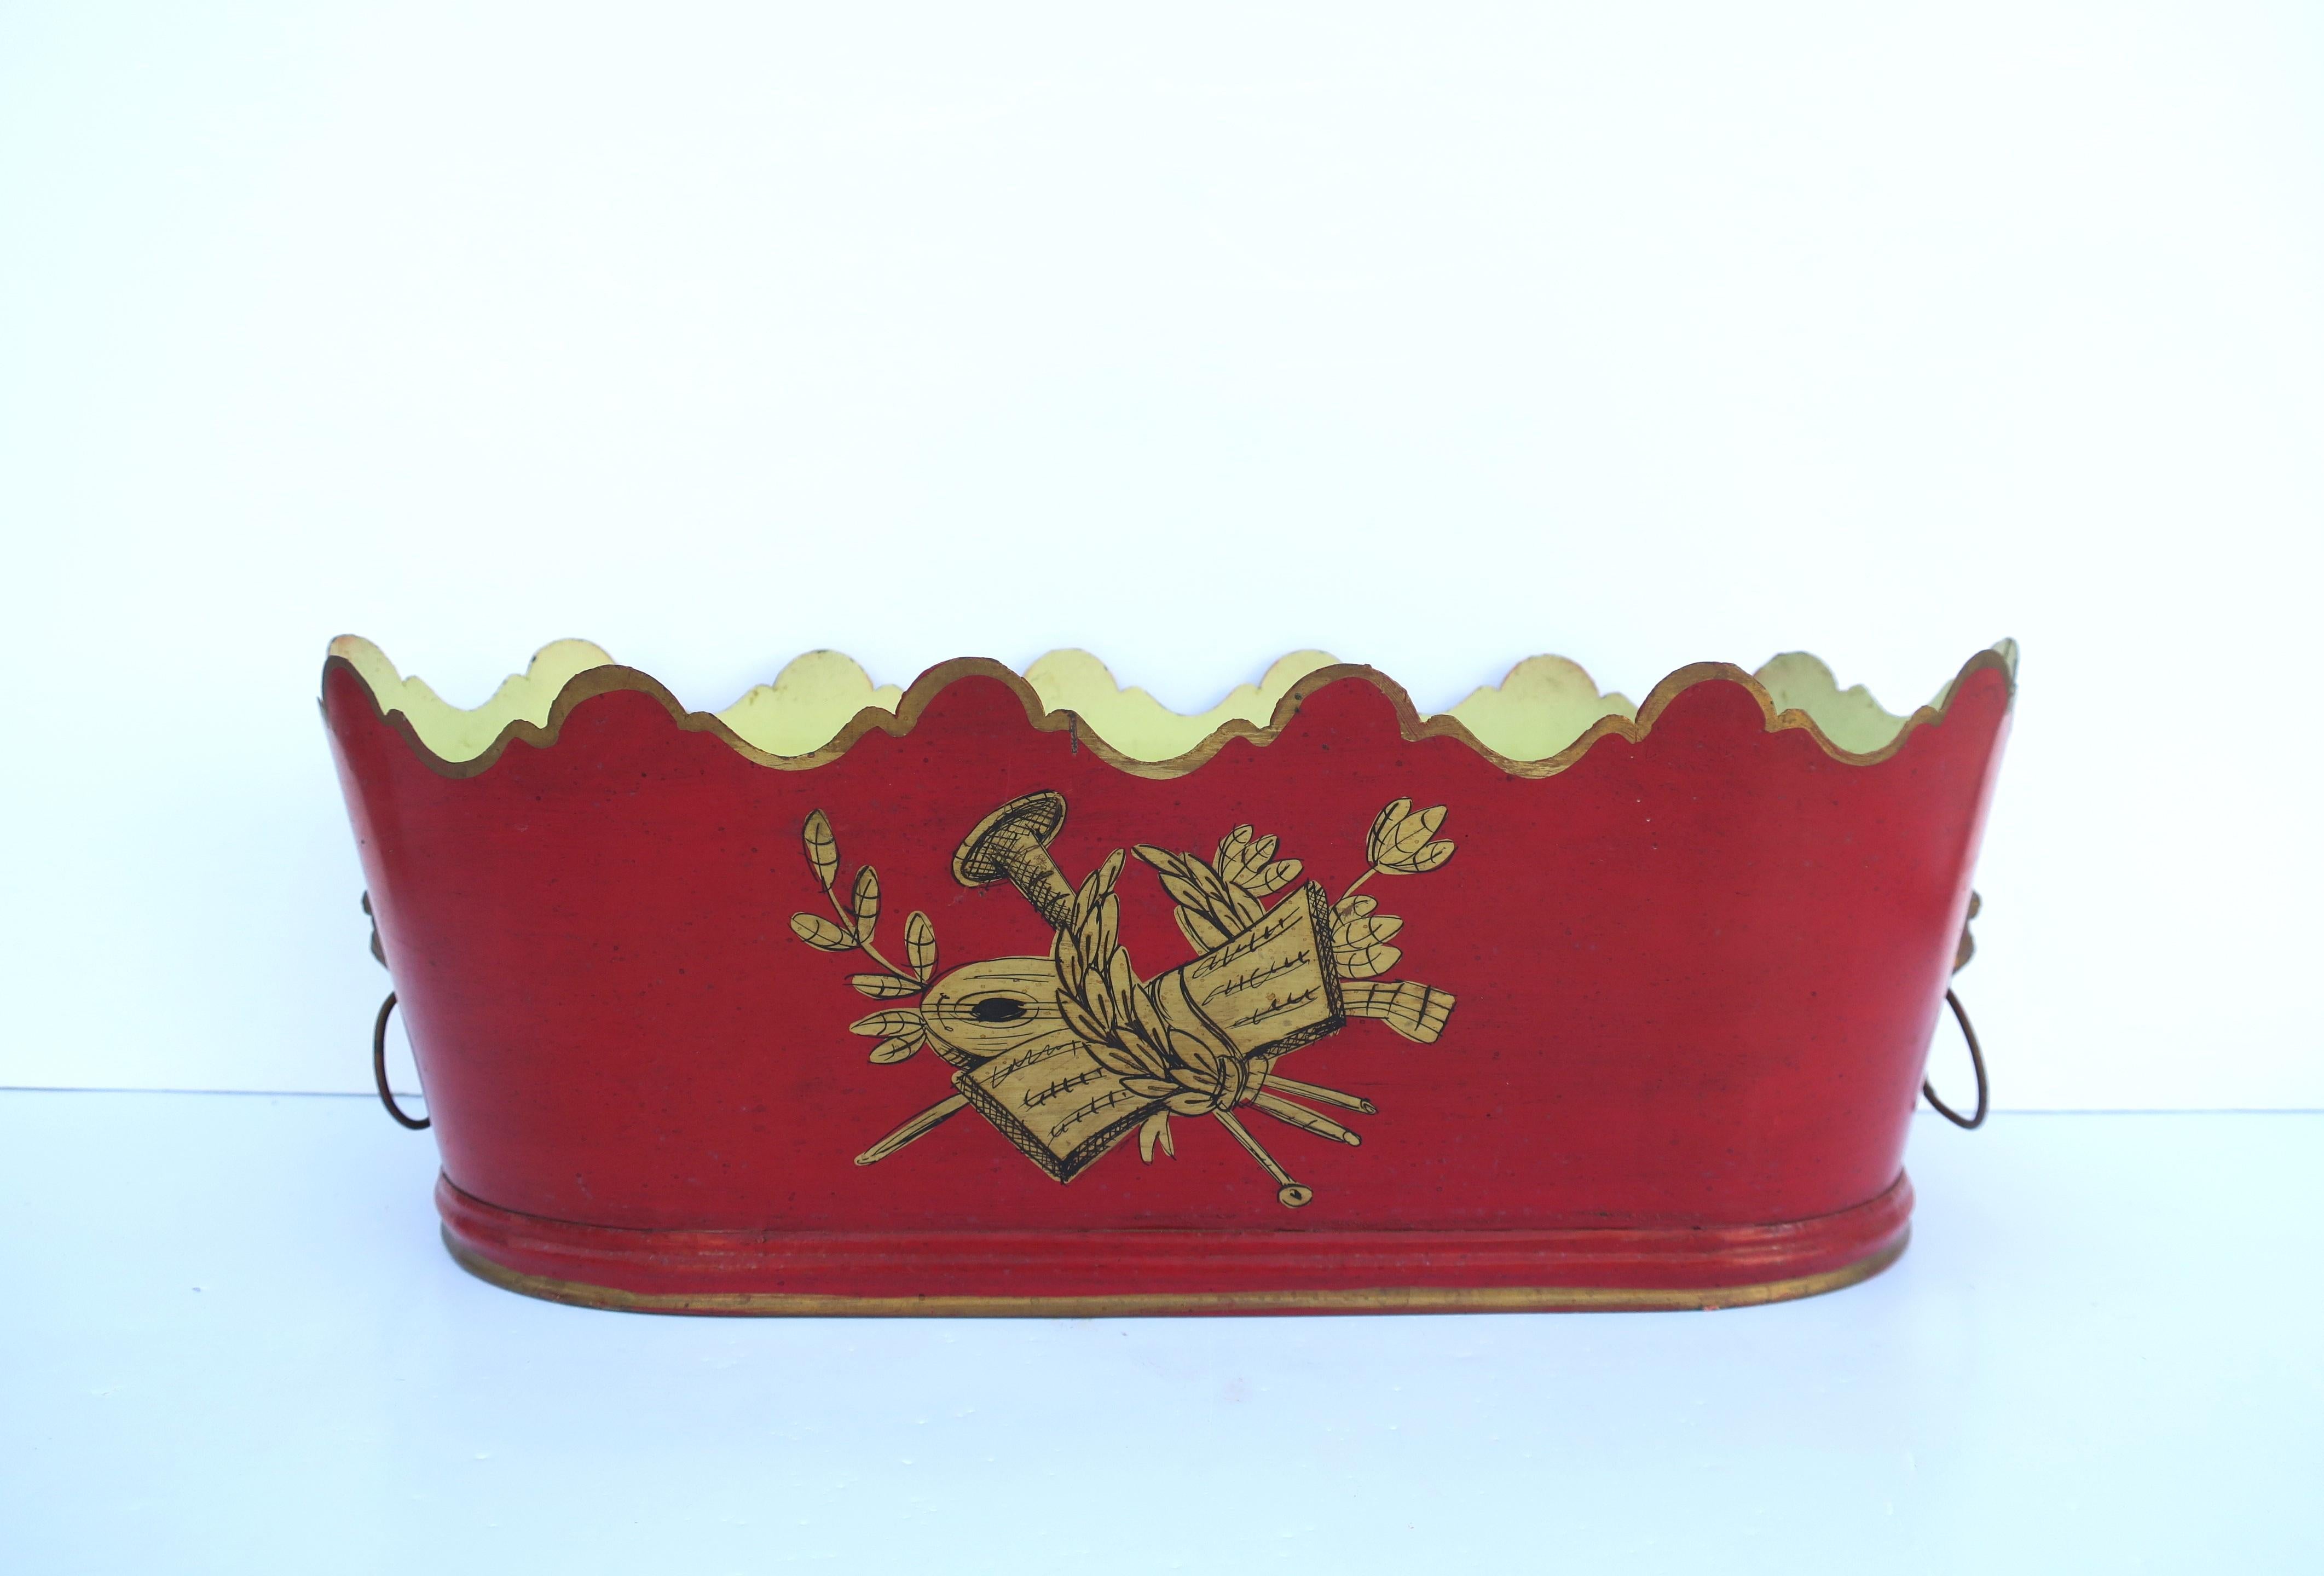 A beautiful Italian red and gold metal tole plant or flower planter cachepot jardiniere with lion head design, in the Regency style, circa mid to late 20th century, Italy. Piece is red metal tole with scalloped edge design in gold, gold design at